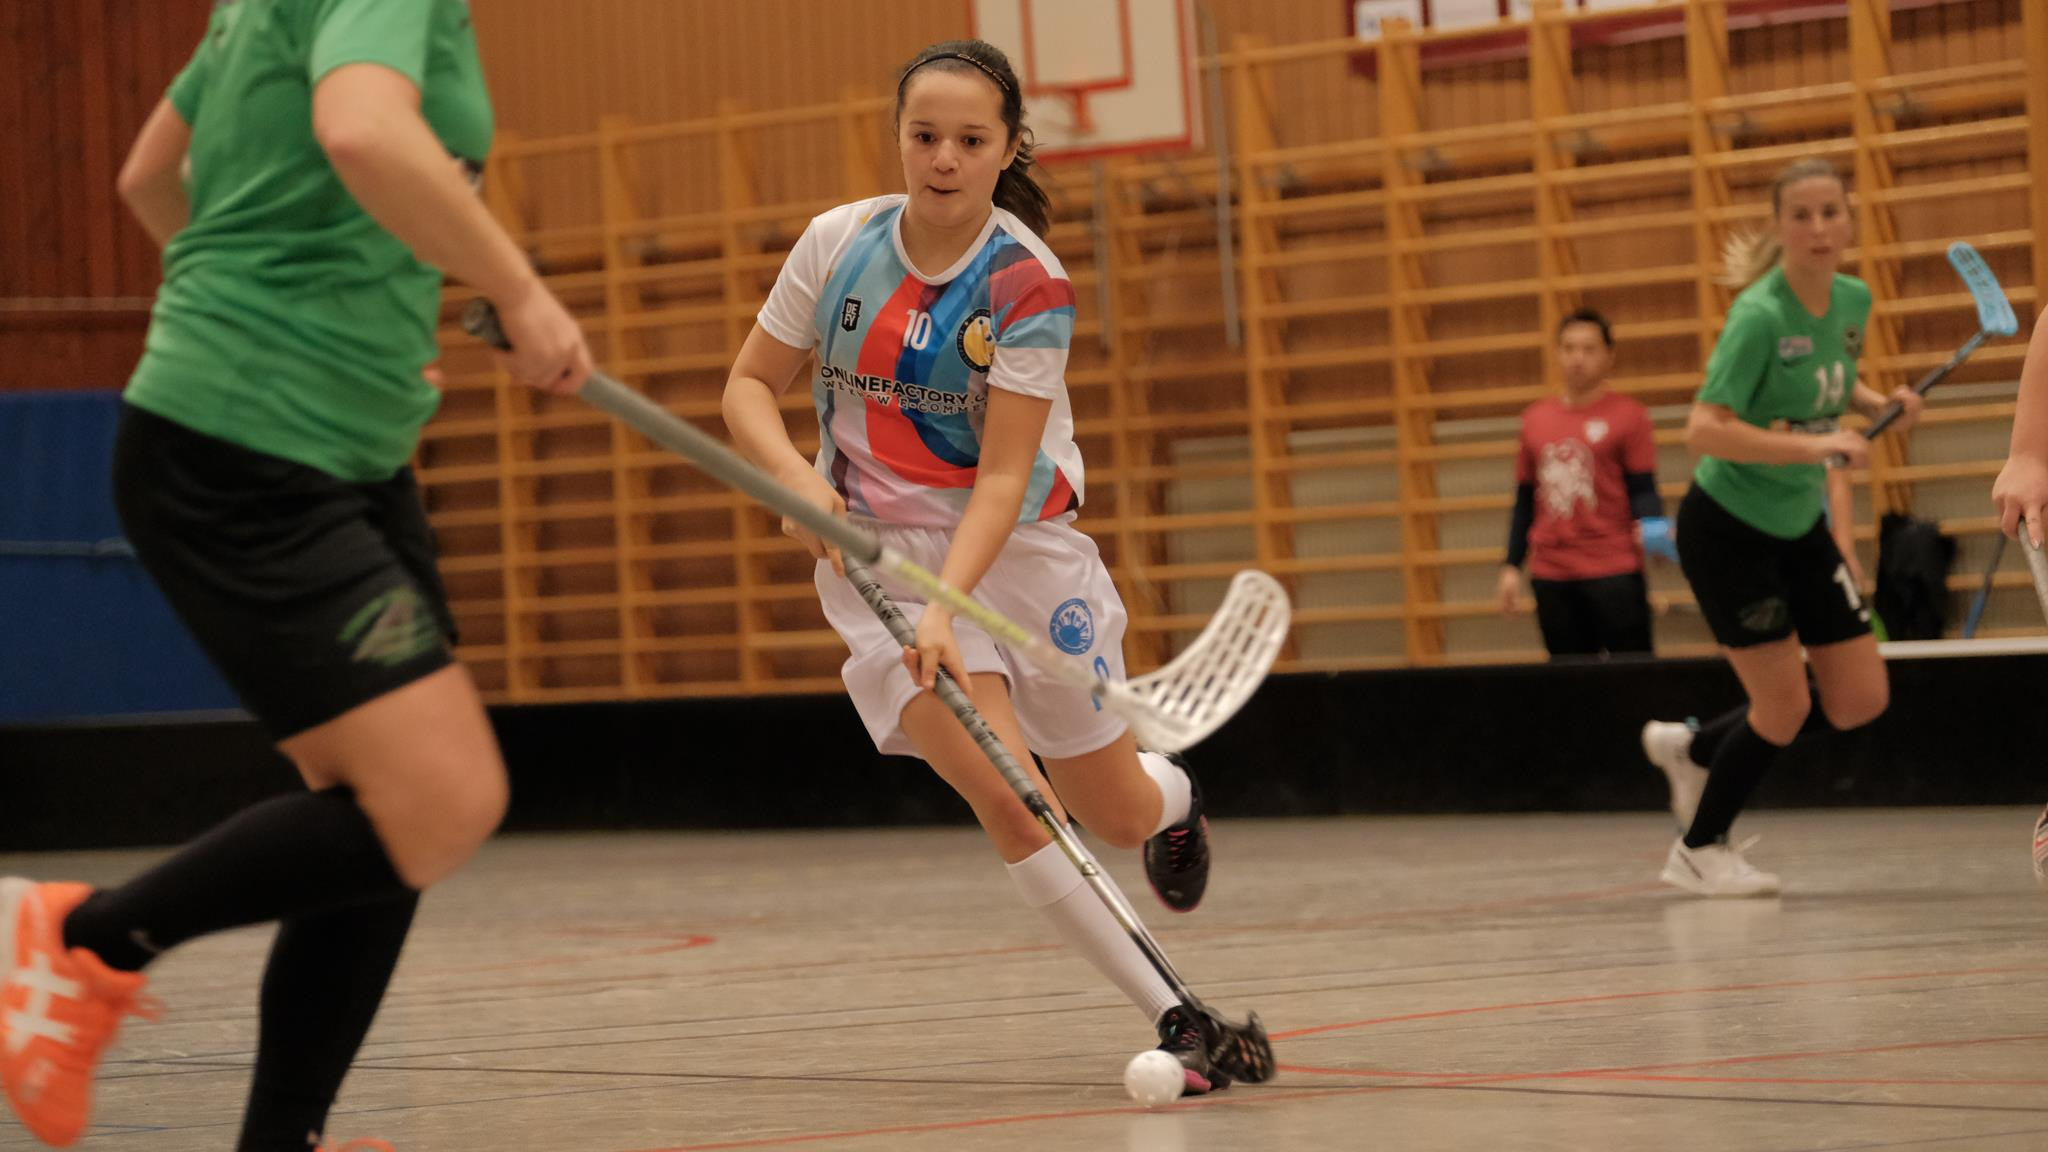 Philippines to make debut at AOFC qualification event for 2019 Women's World Floorball Championships